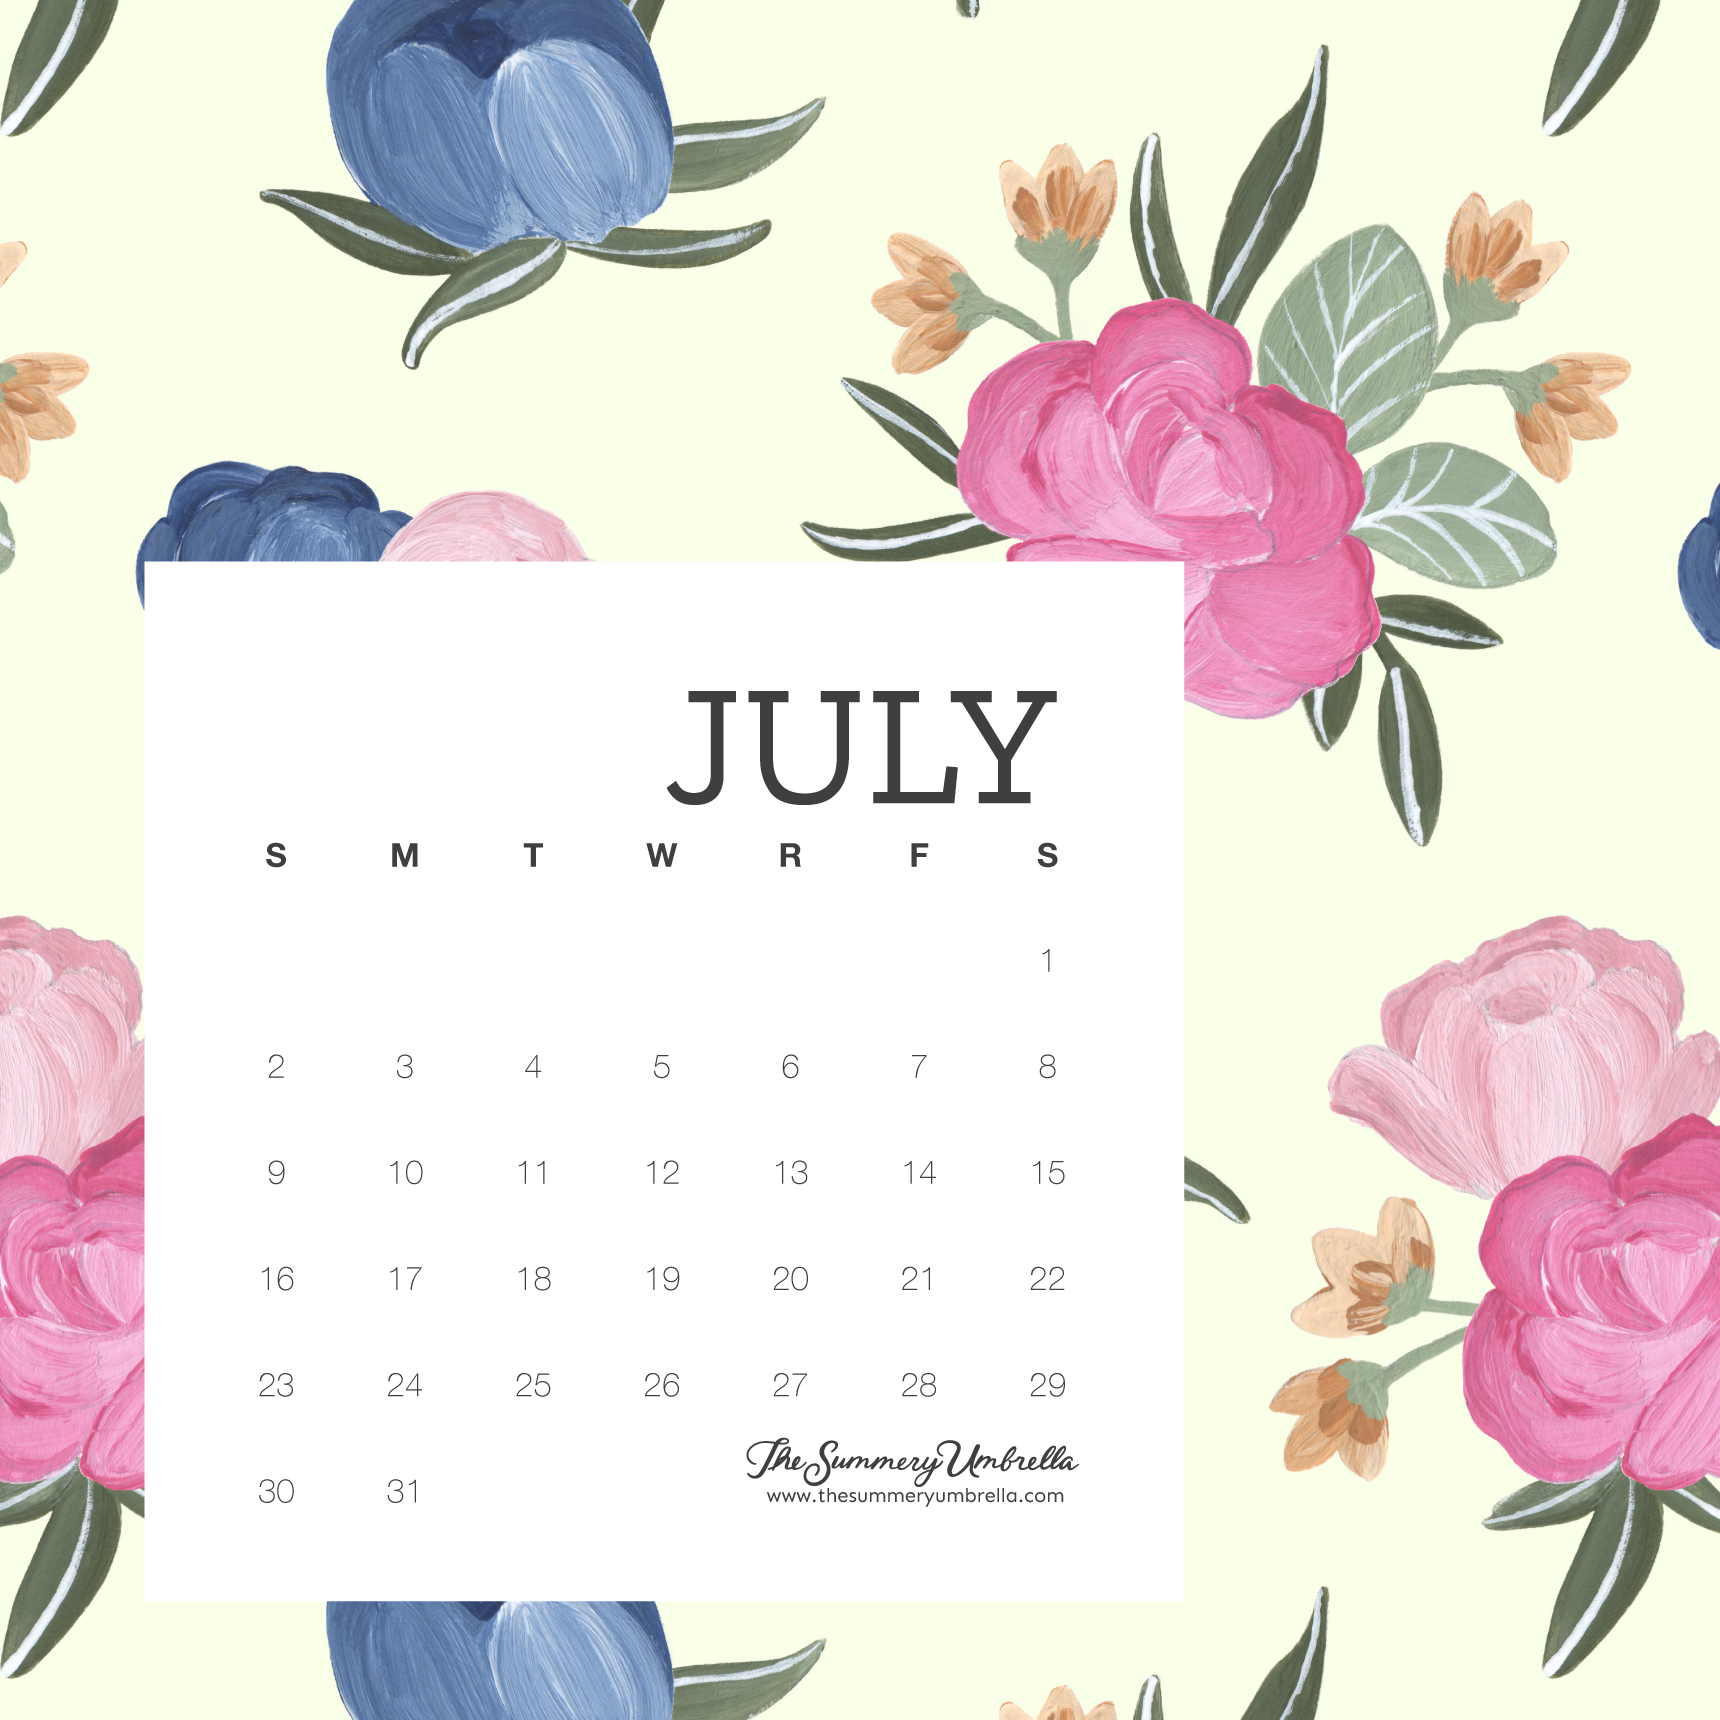 July Calendar Download: Stay On Top of Your Schedule